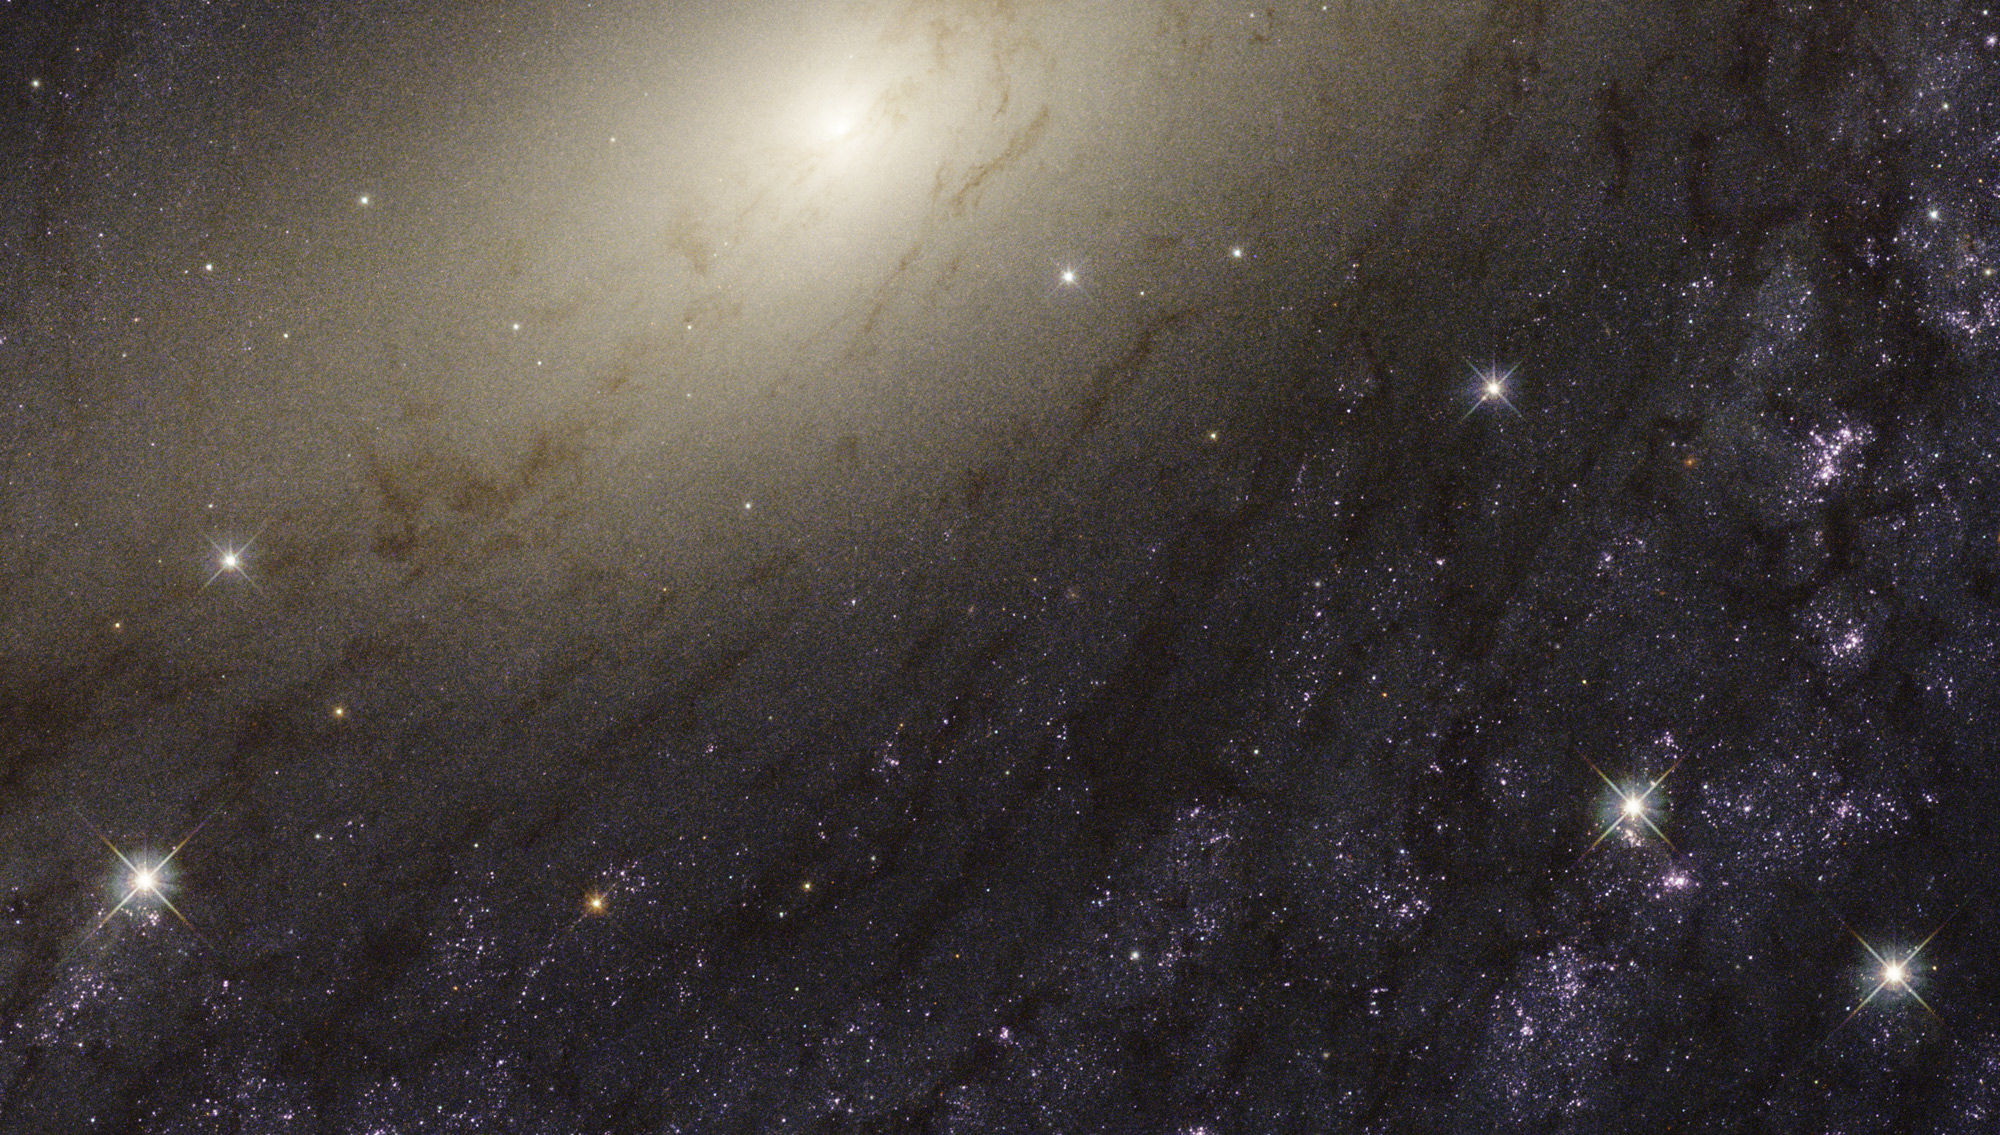 The central region of the gorgeous spiral galaxy NGC 6744, imaged using the Hubble Space Telescope. Credit: NASA, ESA, and the LEGUS team